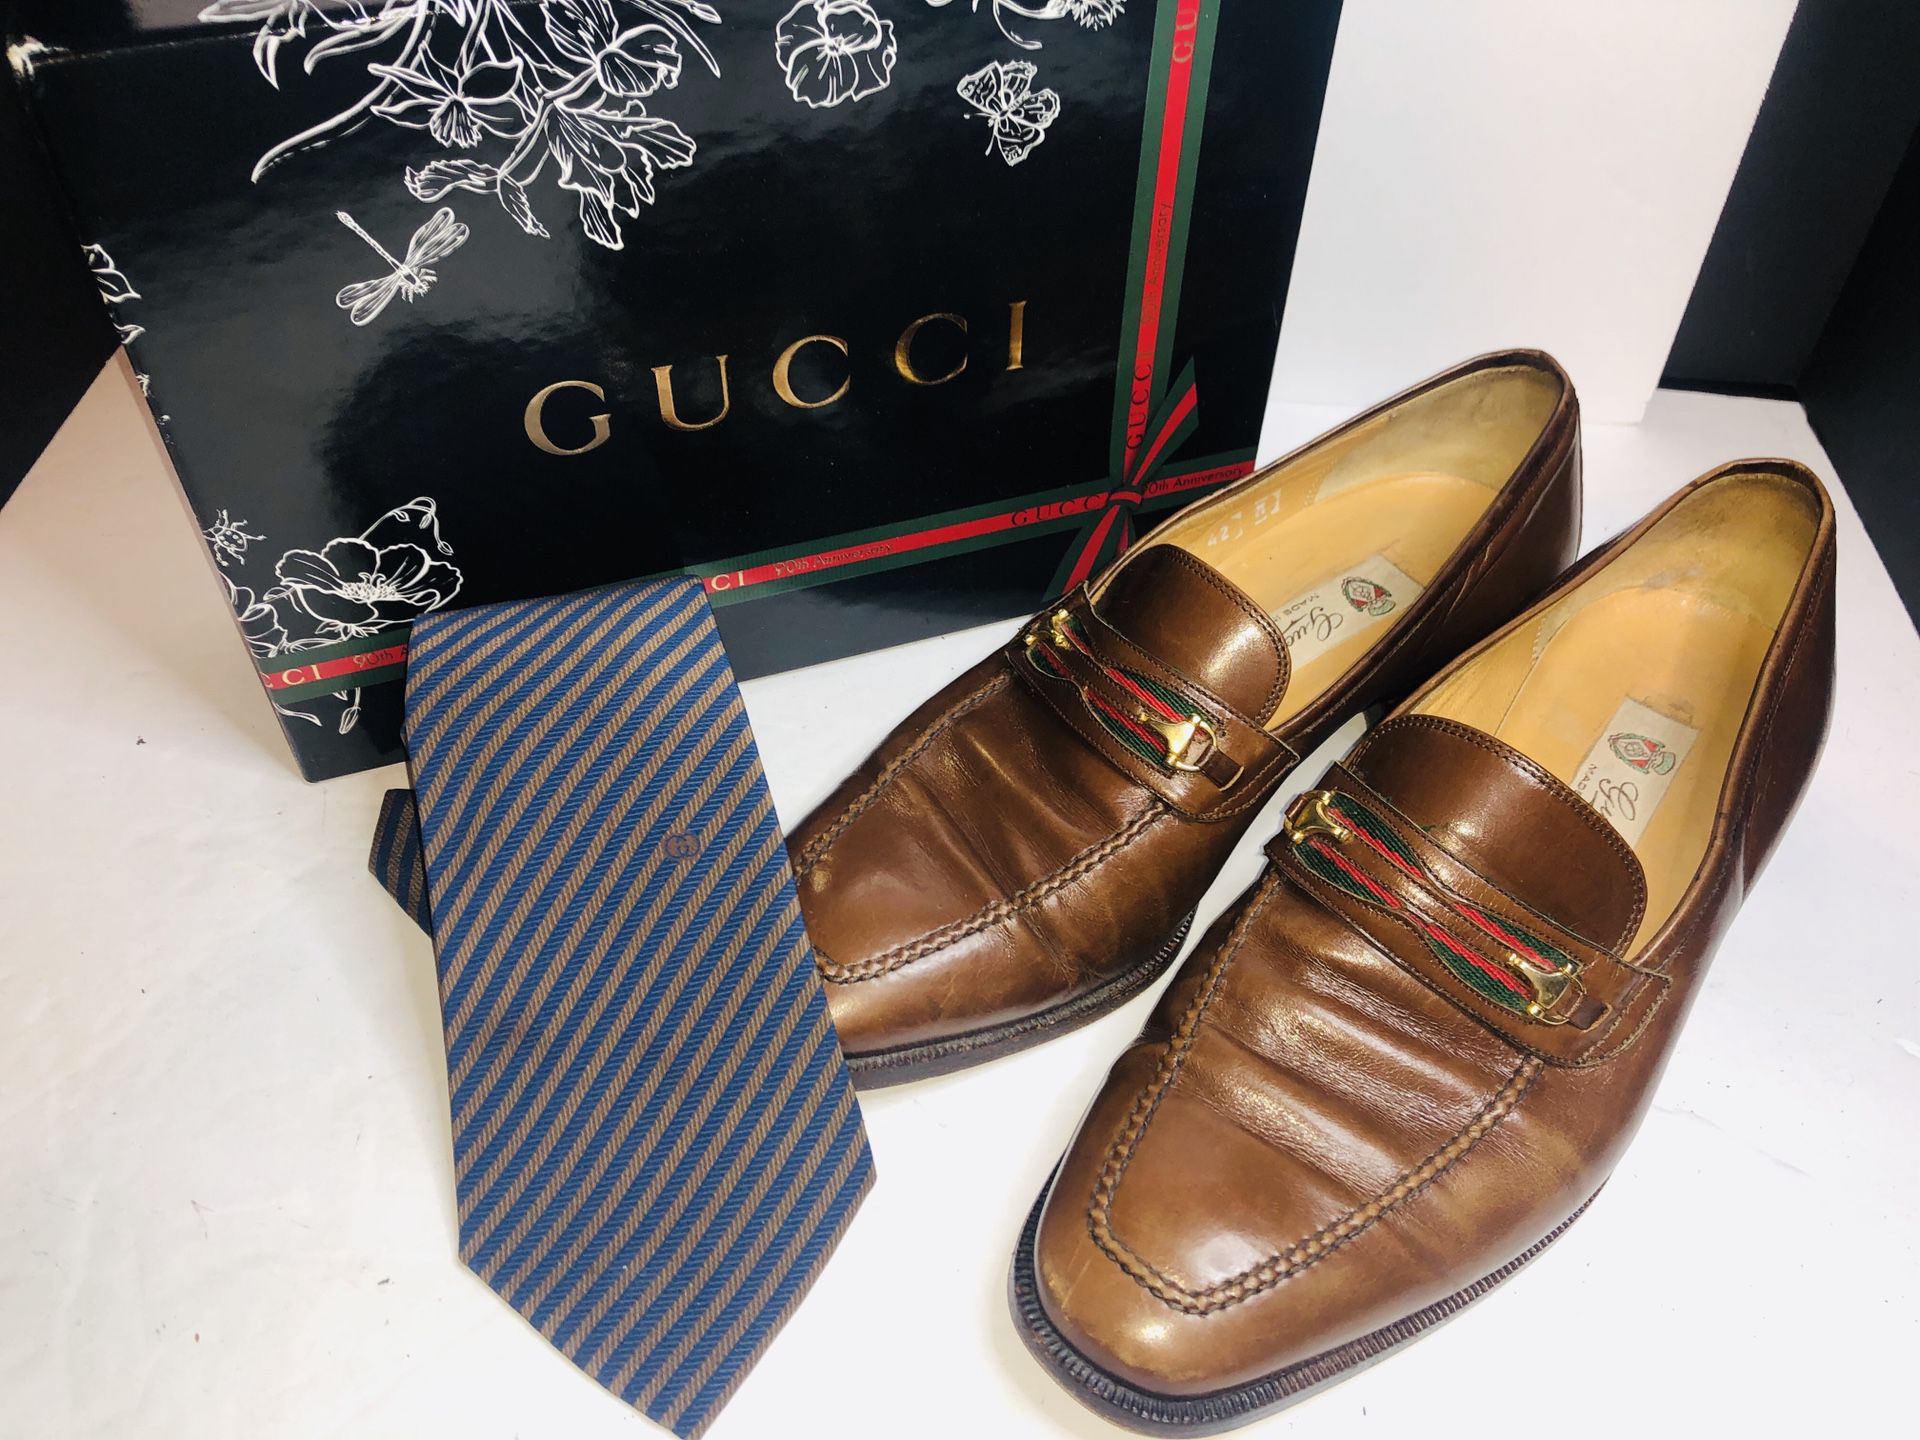 Men’s horsebit GUCCI loafers size 42 with tie very nice